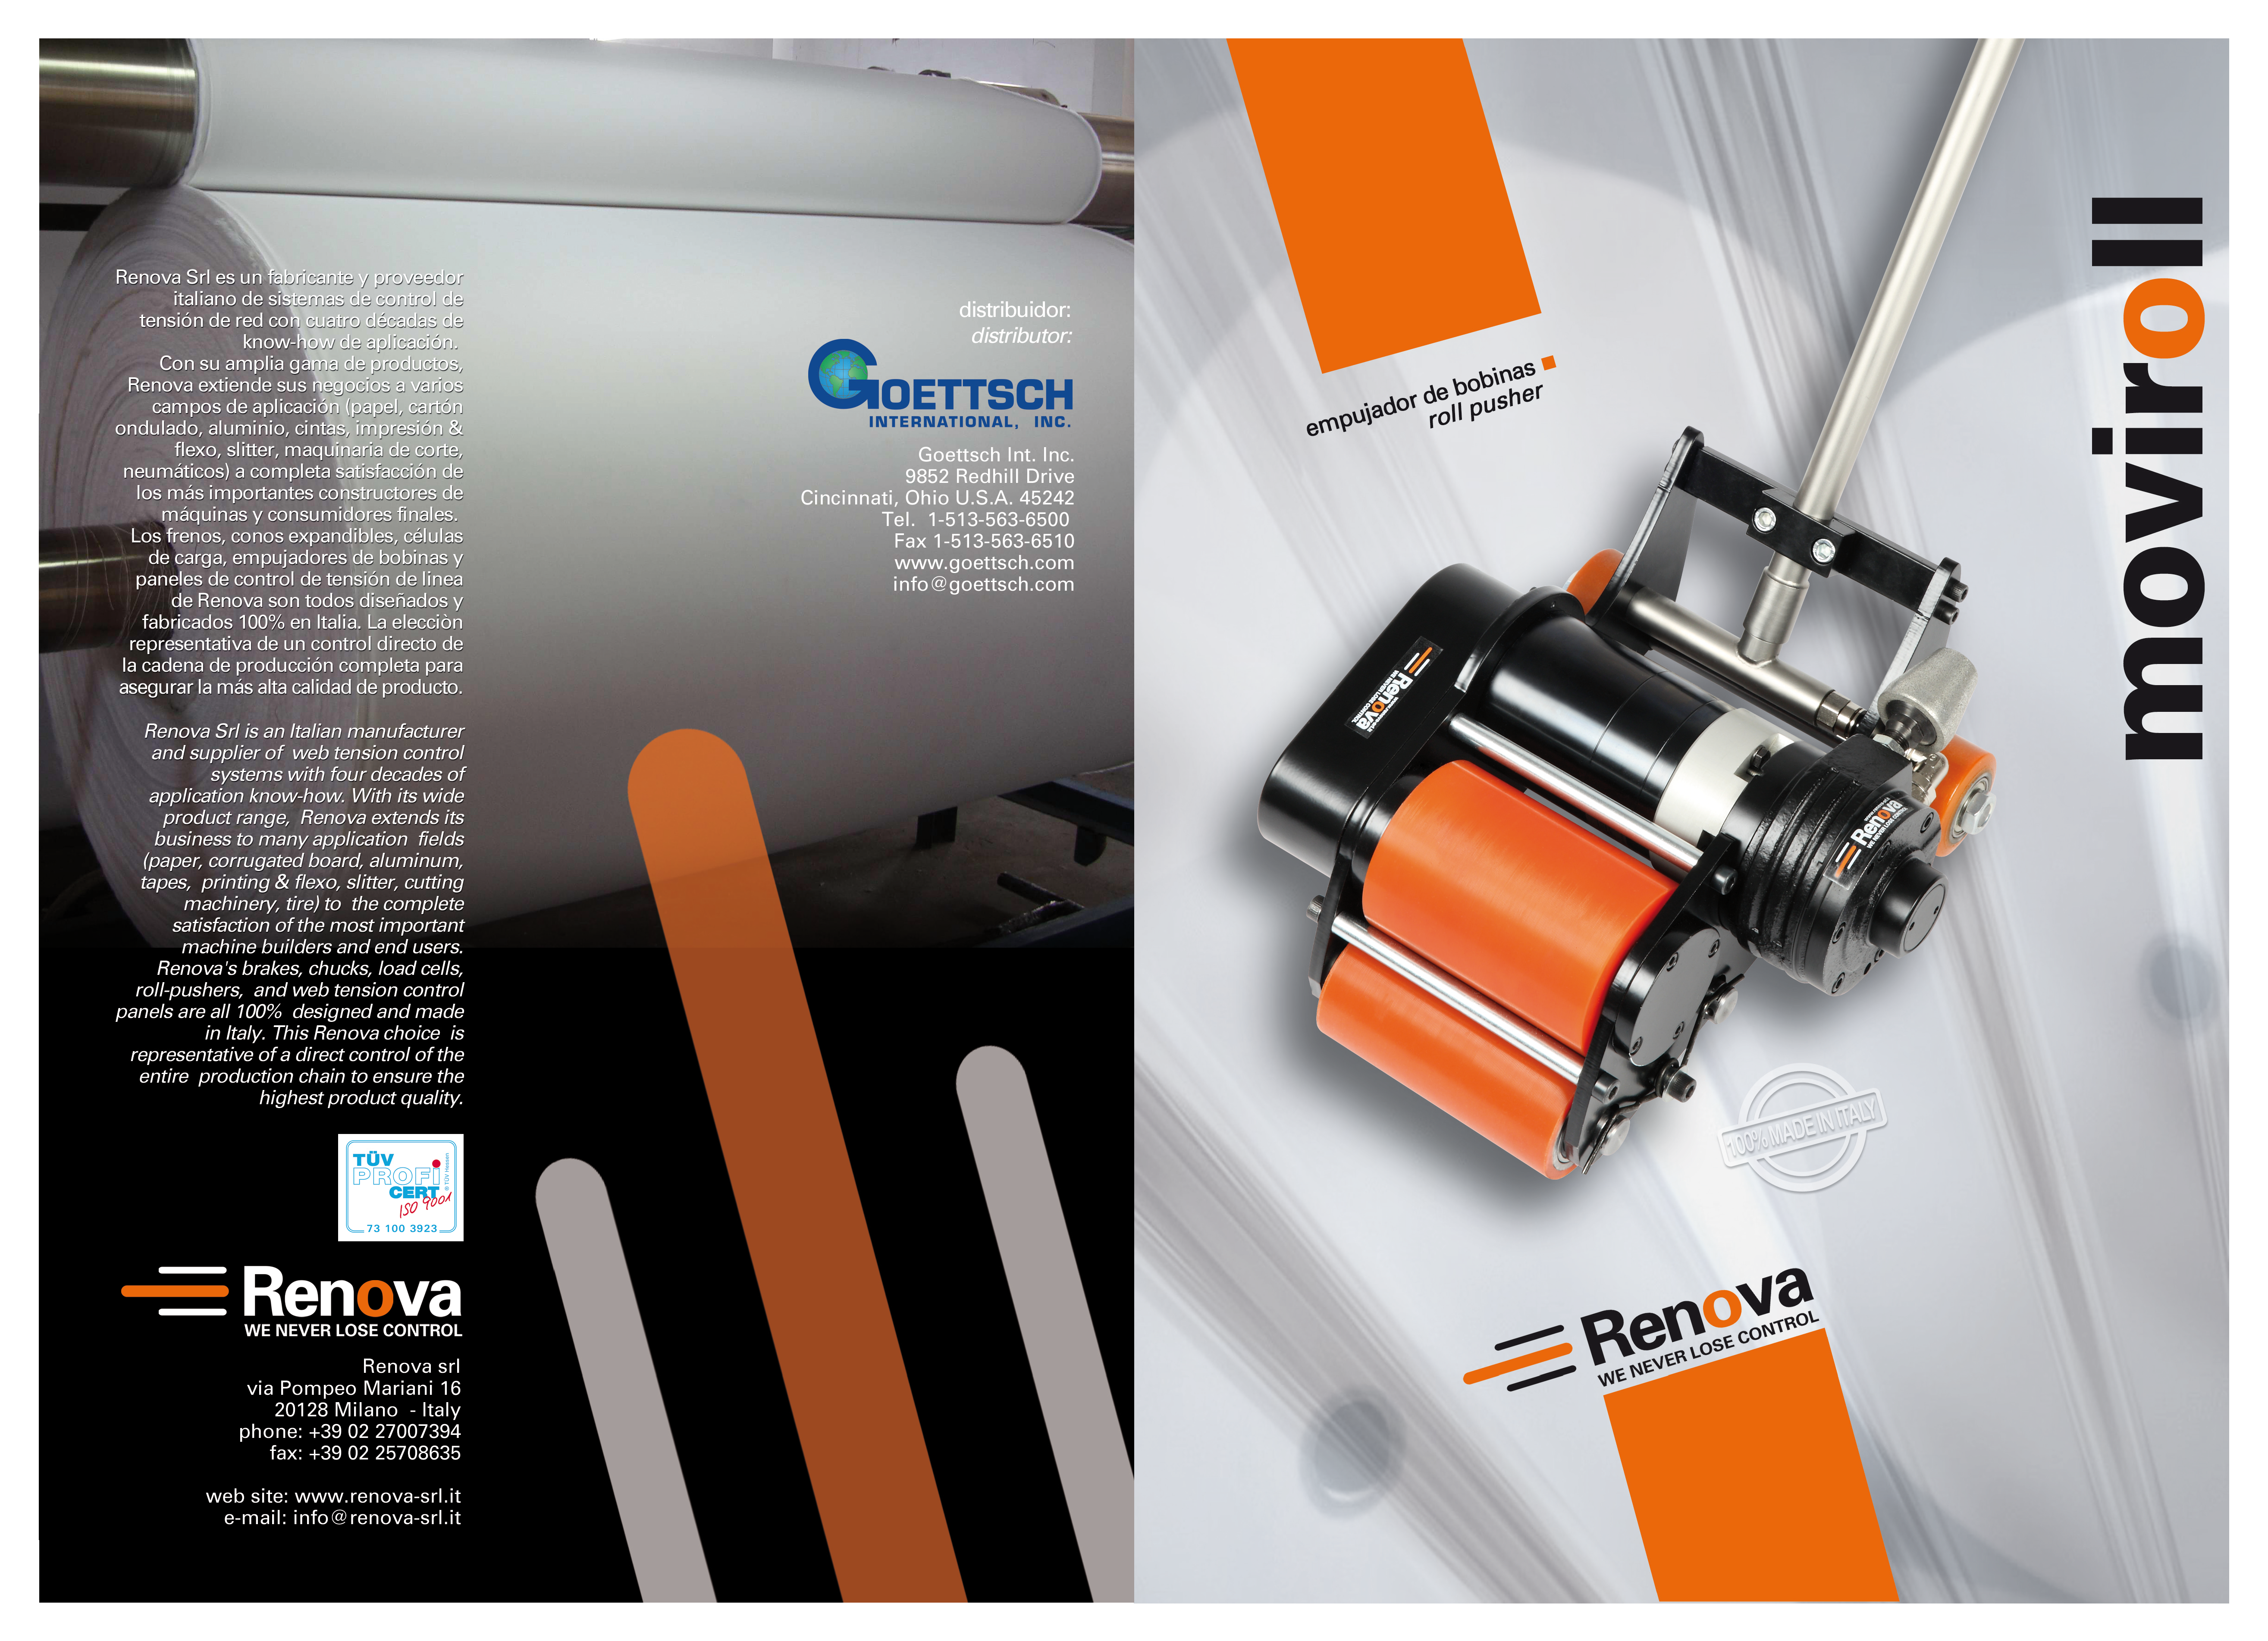 Read more about roll moving equipment in the Renova Moviroll brochure 